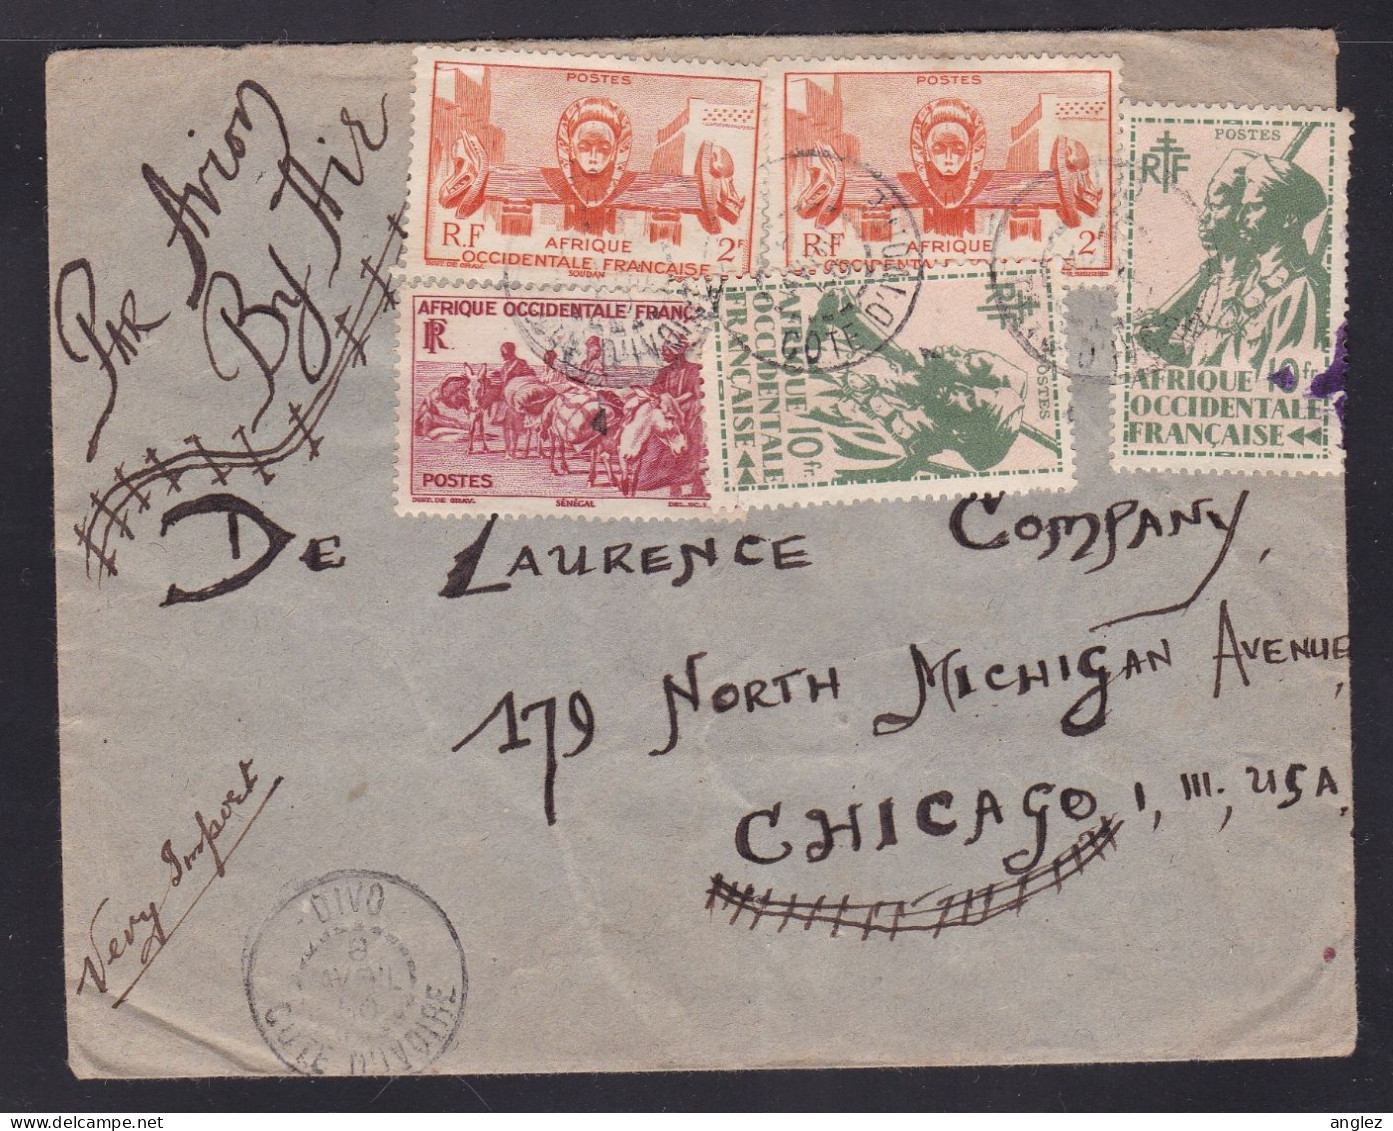 France / AOF / Cote D'Ivoire / Ivory Coast - 1950 Airmail Cover Divo To Chicago USA - Cartas & Documentos